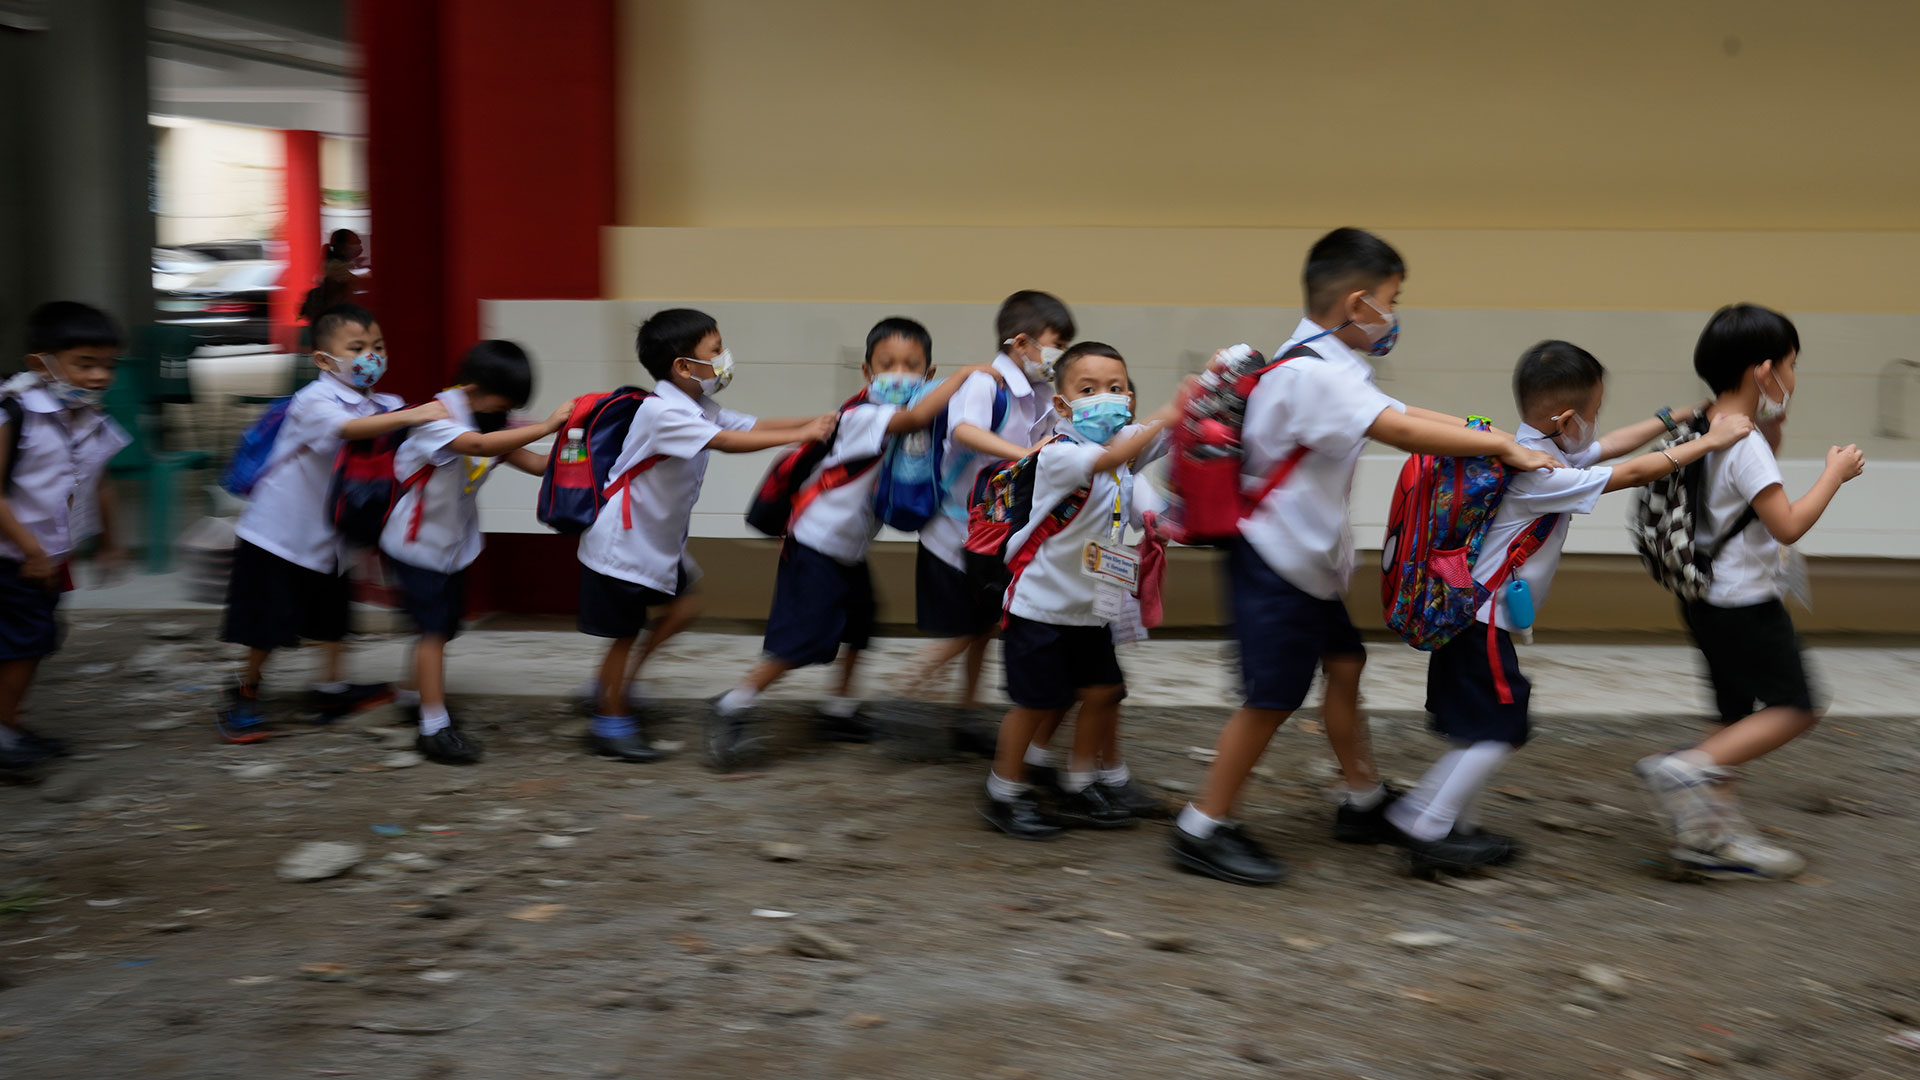 Students line up during the opening of classes at San Juan Elementary School in metro Manila, Philippines, Monday, Aug. 22, 2022. (AP Photo/Aaron Favila)